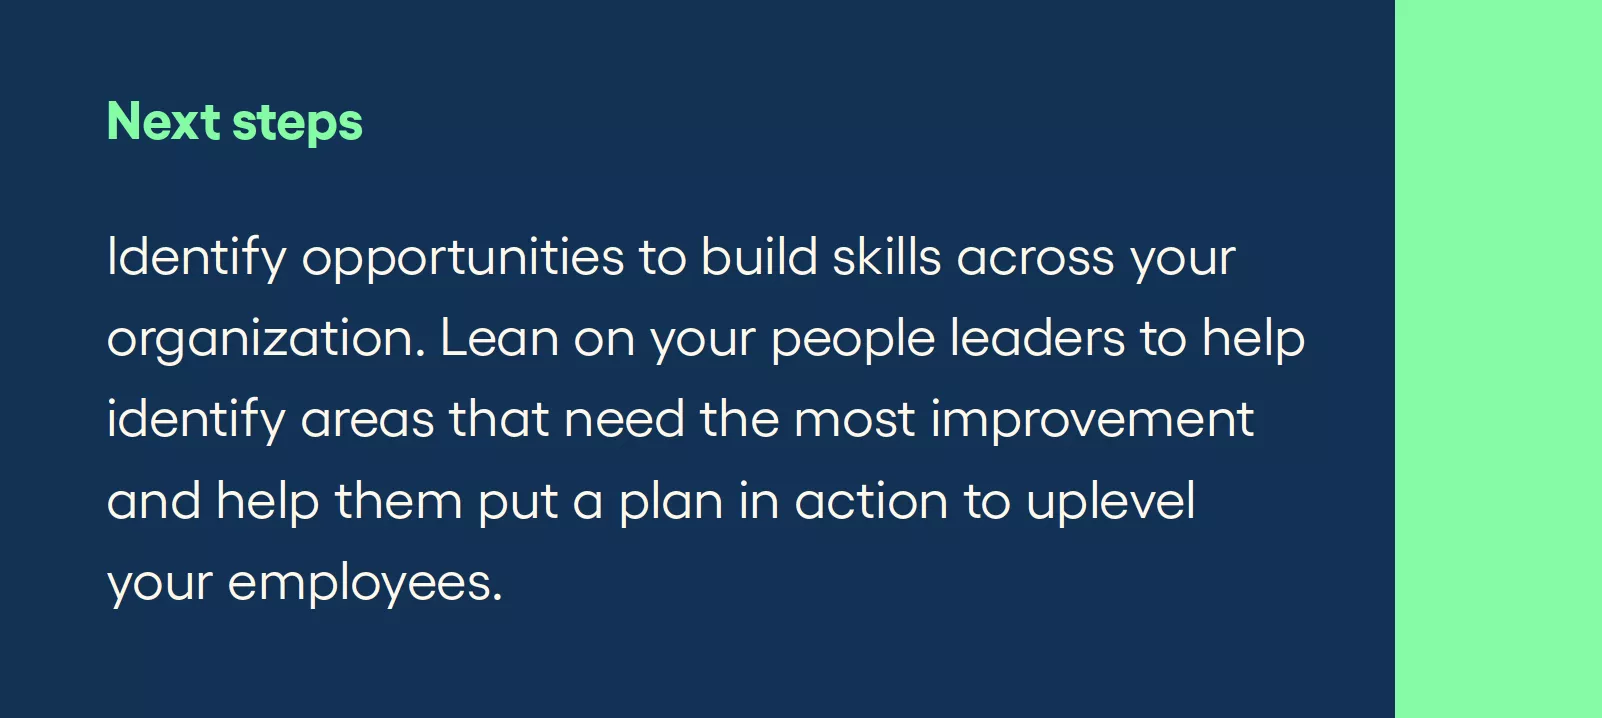 Next steps Identify opportunities to build skills across your organization. Lean on your people leaders to help identify areas that need the most improvement and help them put a plan in action to uplevel your employees.